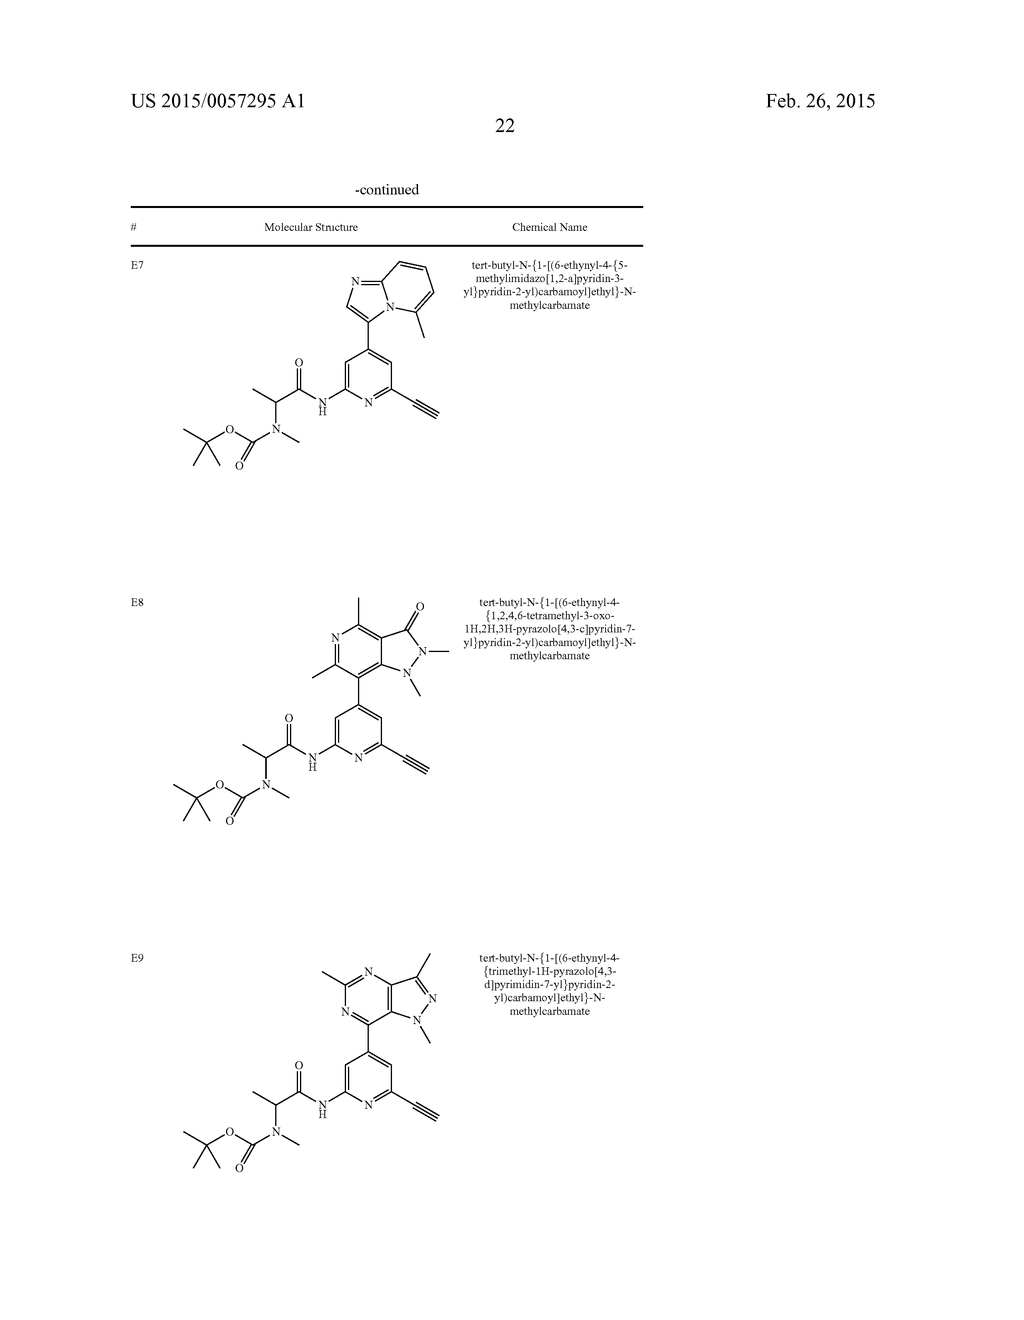 New 6-Alkynyl Pyridine - diagram, schematic, and image 23